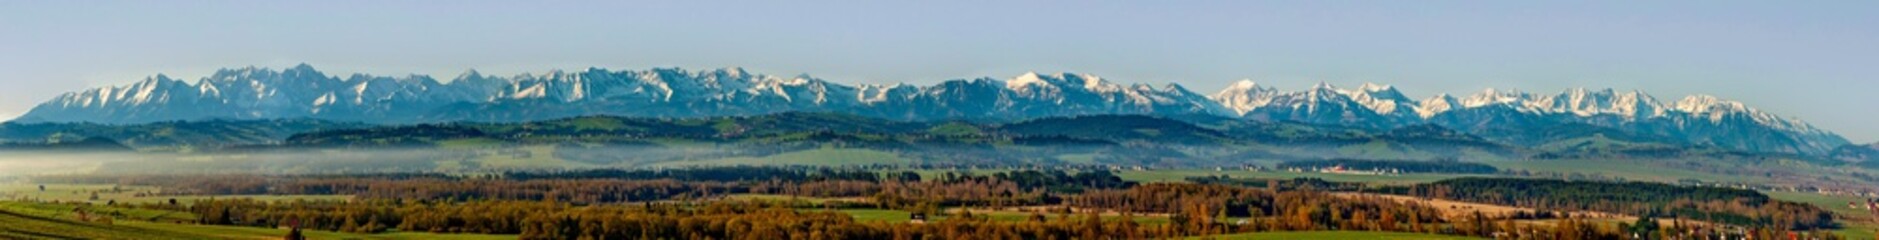 Extra wide panorama of the Tatra Mountains with forests, hills and meadows in Podhale region in...